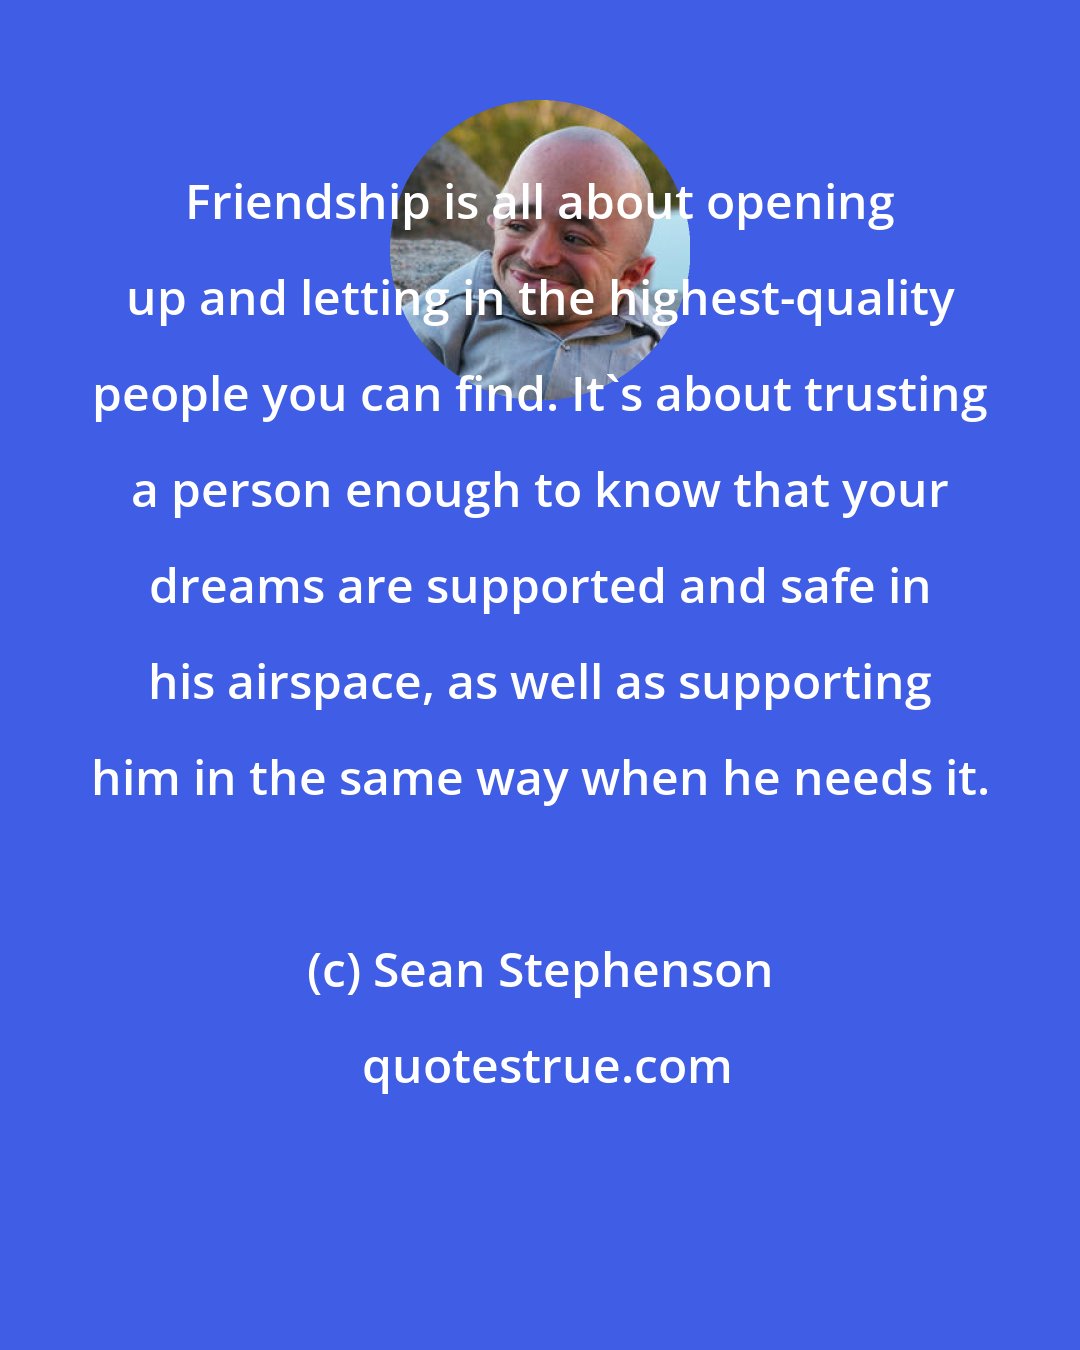 Sean Stephenson: Friendship is all about opening up and letting in the highest-quality people you can find. It's about trusting a person enough to know that your dreams are supported and safe in his airspace, as well as supporting him in the same way when he needs it.